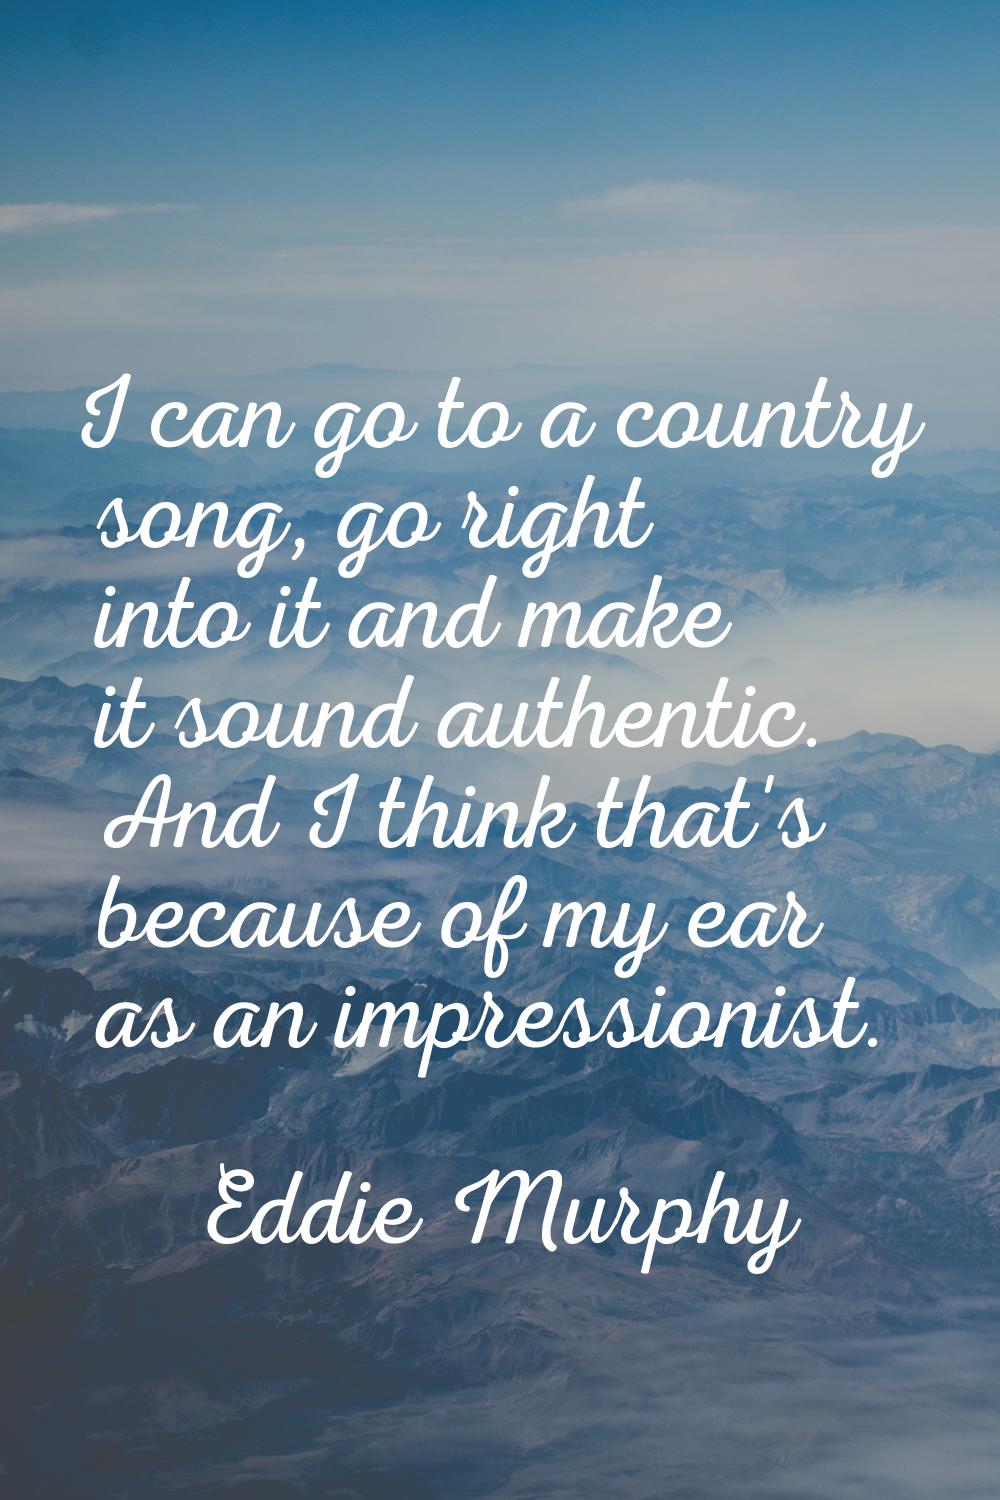 I can go to a country song, go right into it and make it sound authentic. And I think that's becaus